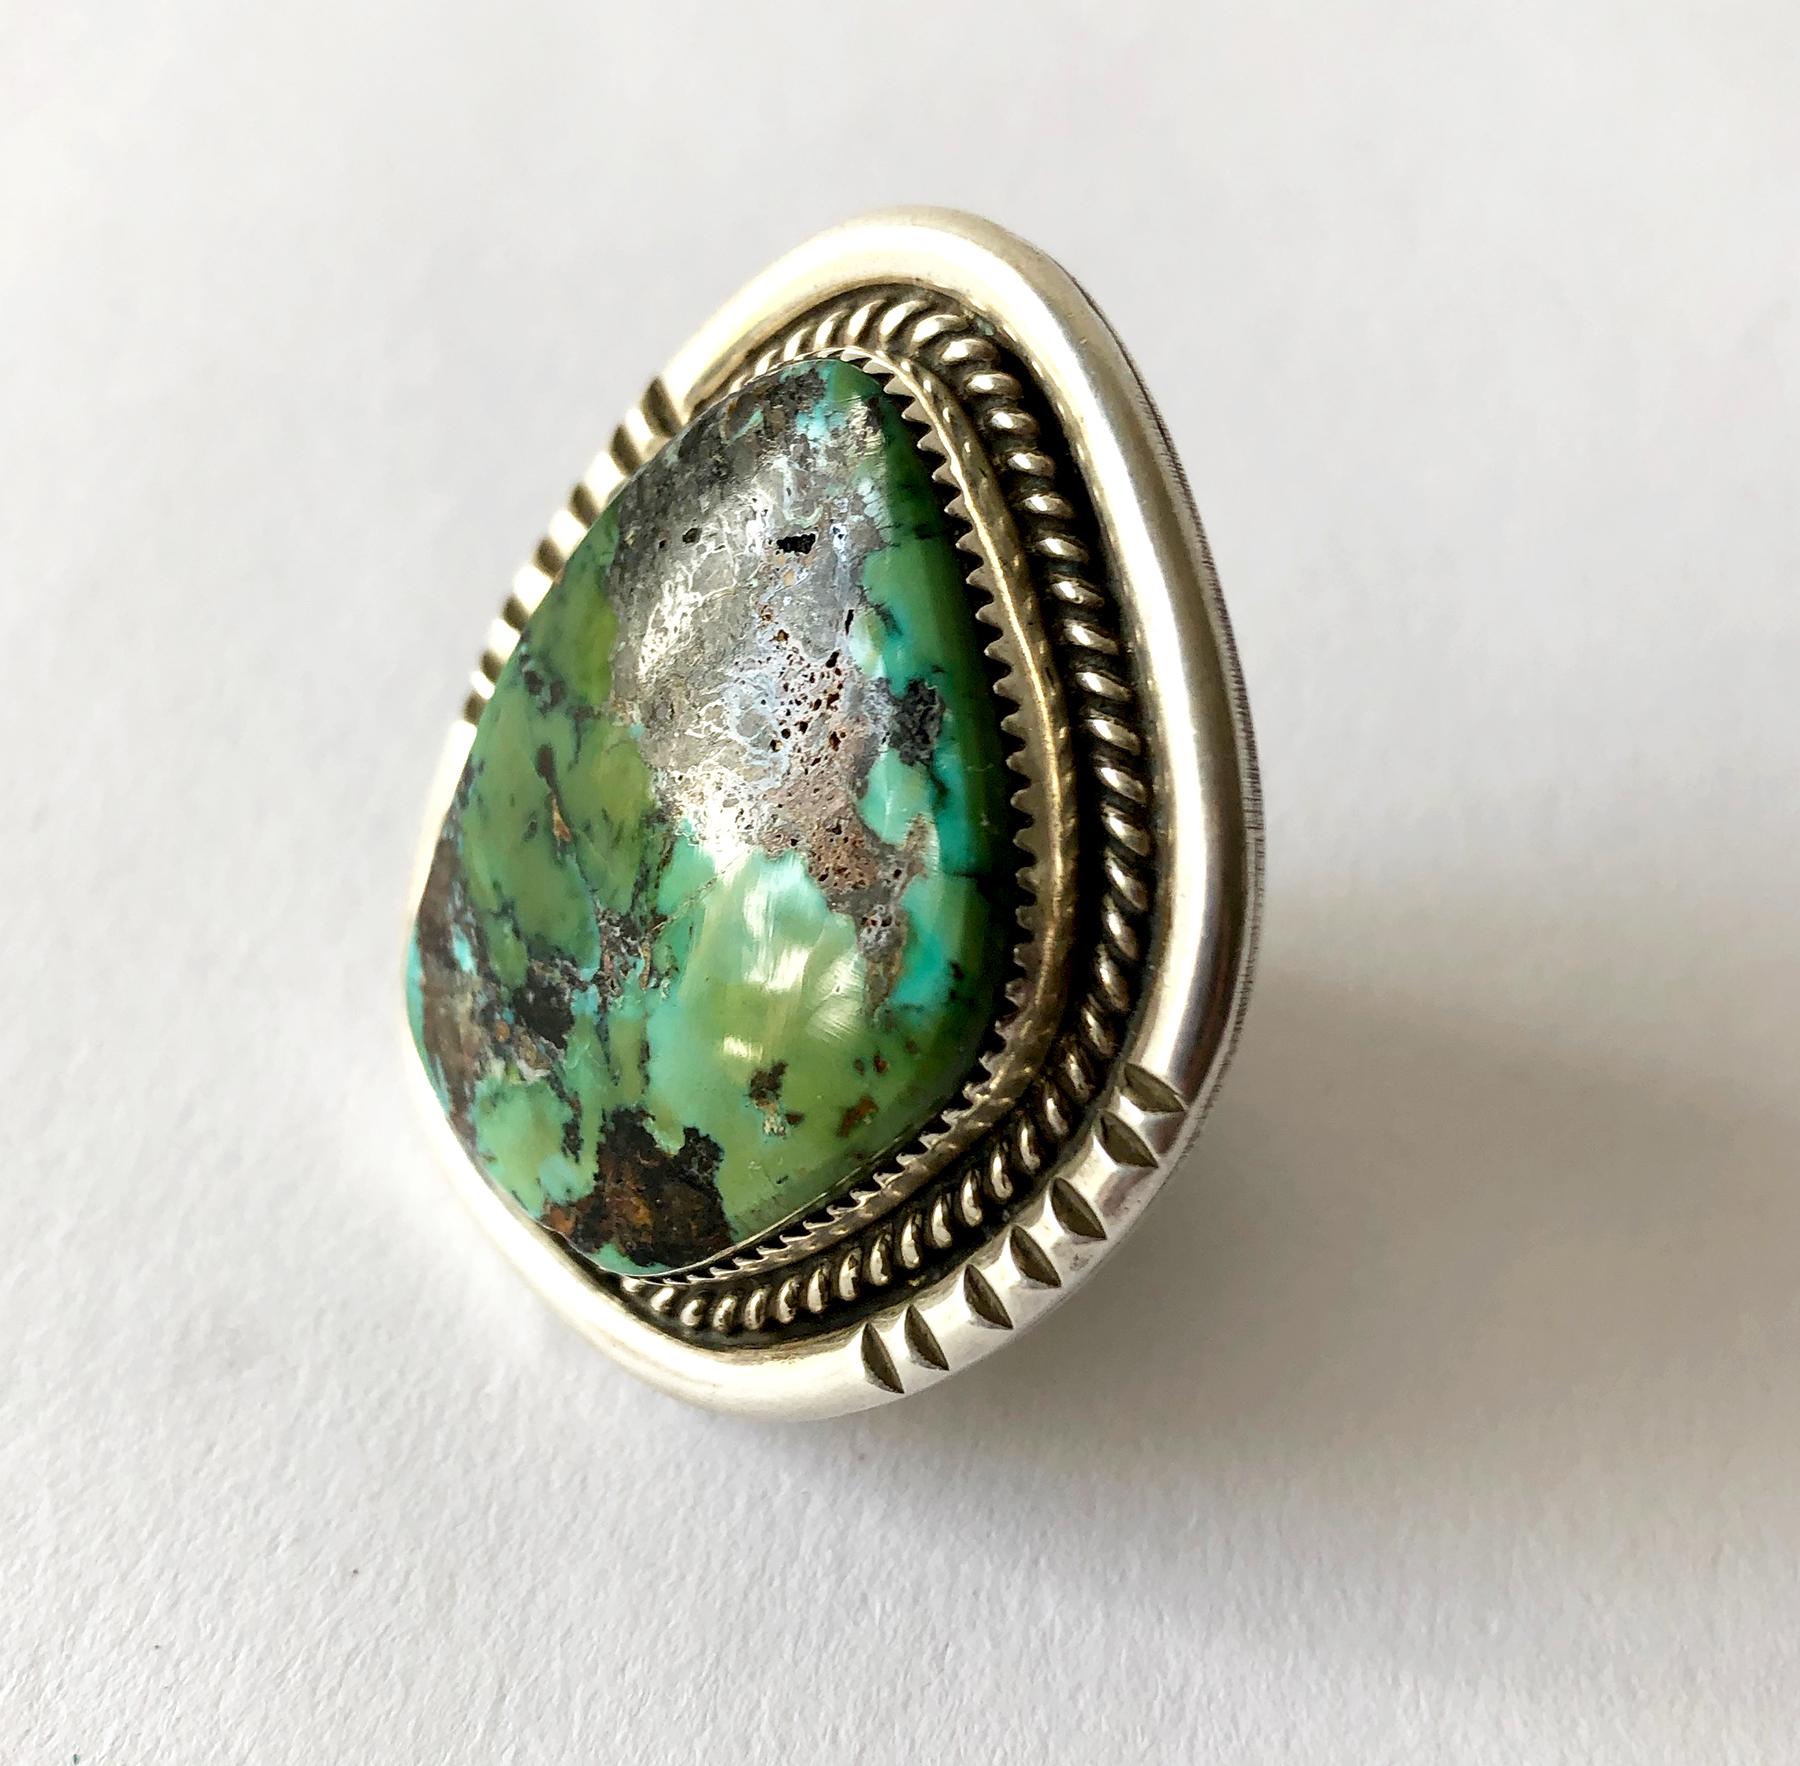 Hefty sterling silver and turquoise ring by Native American jeweler Philip Morse.  Ring is a finger size 11.5 - 12, the face of the ring measures 1.75